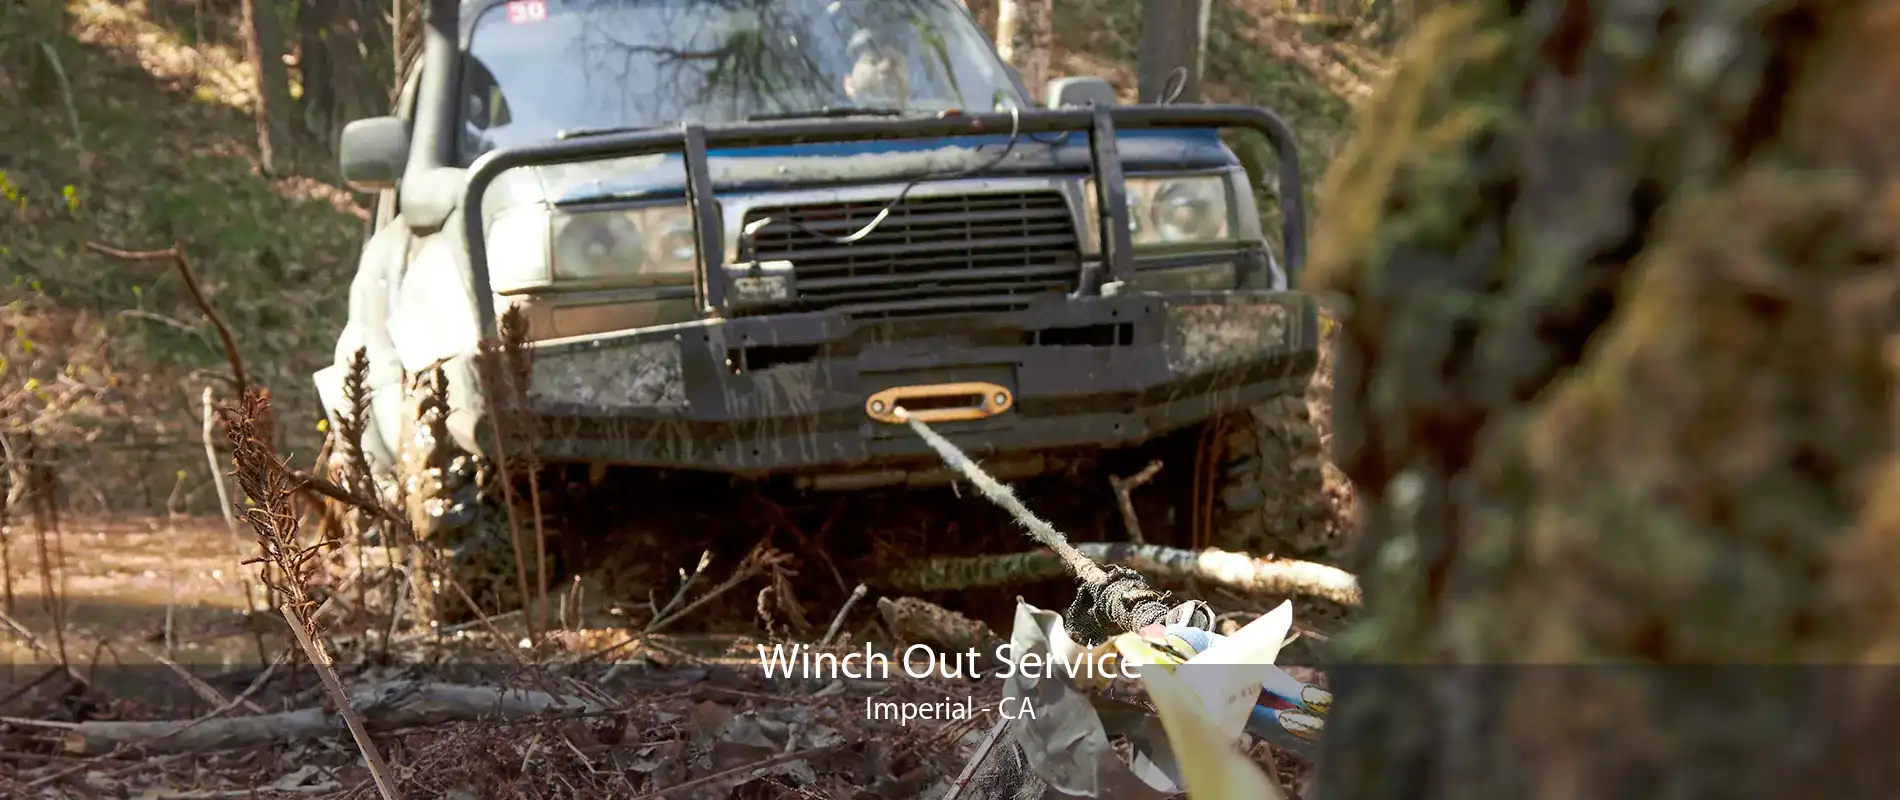 Winch Out Service Imperial - CA